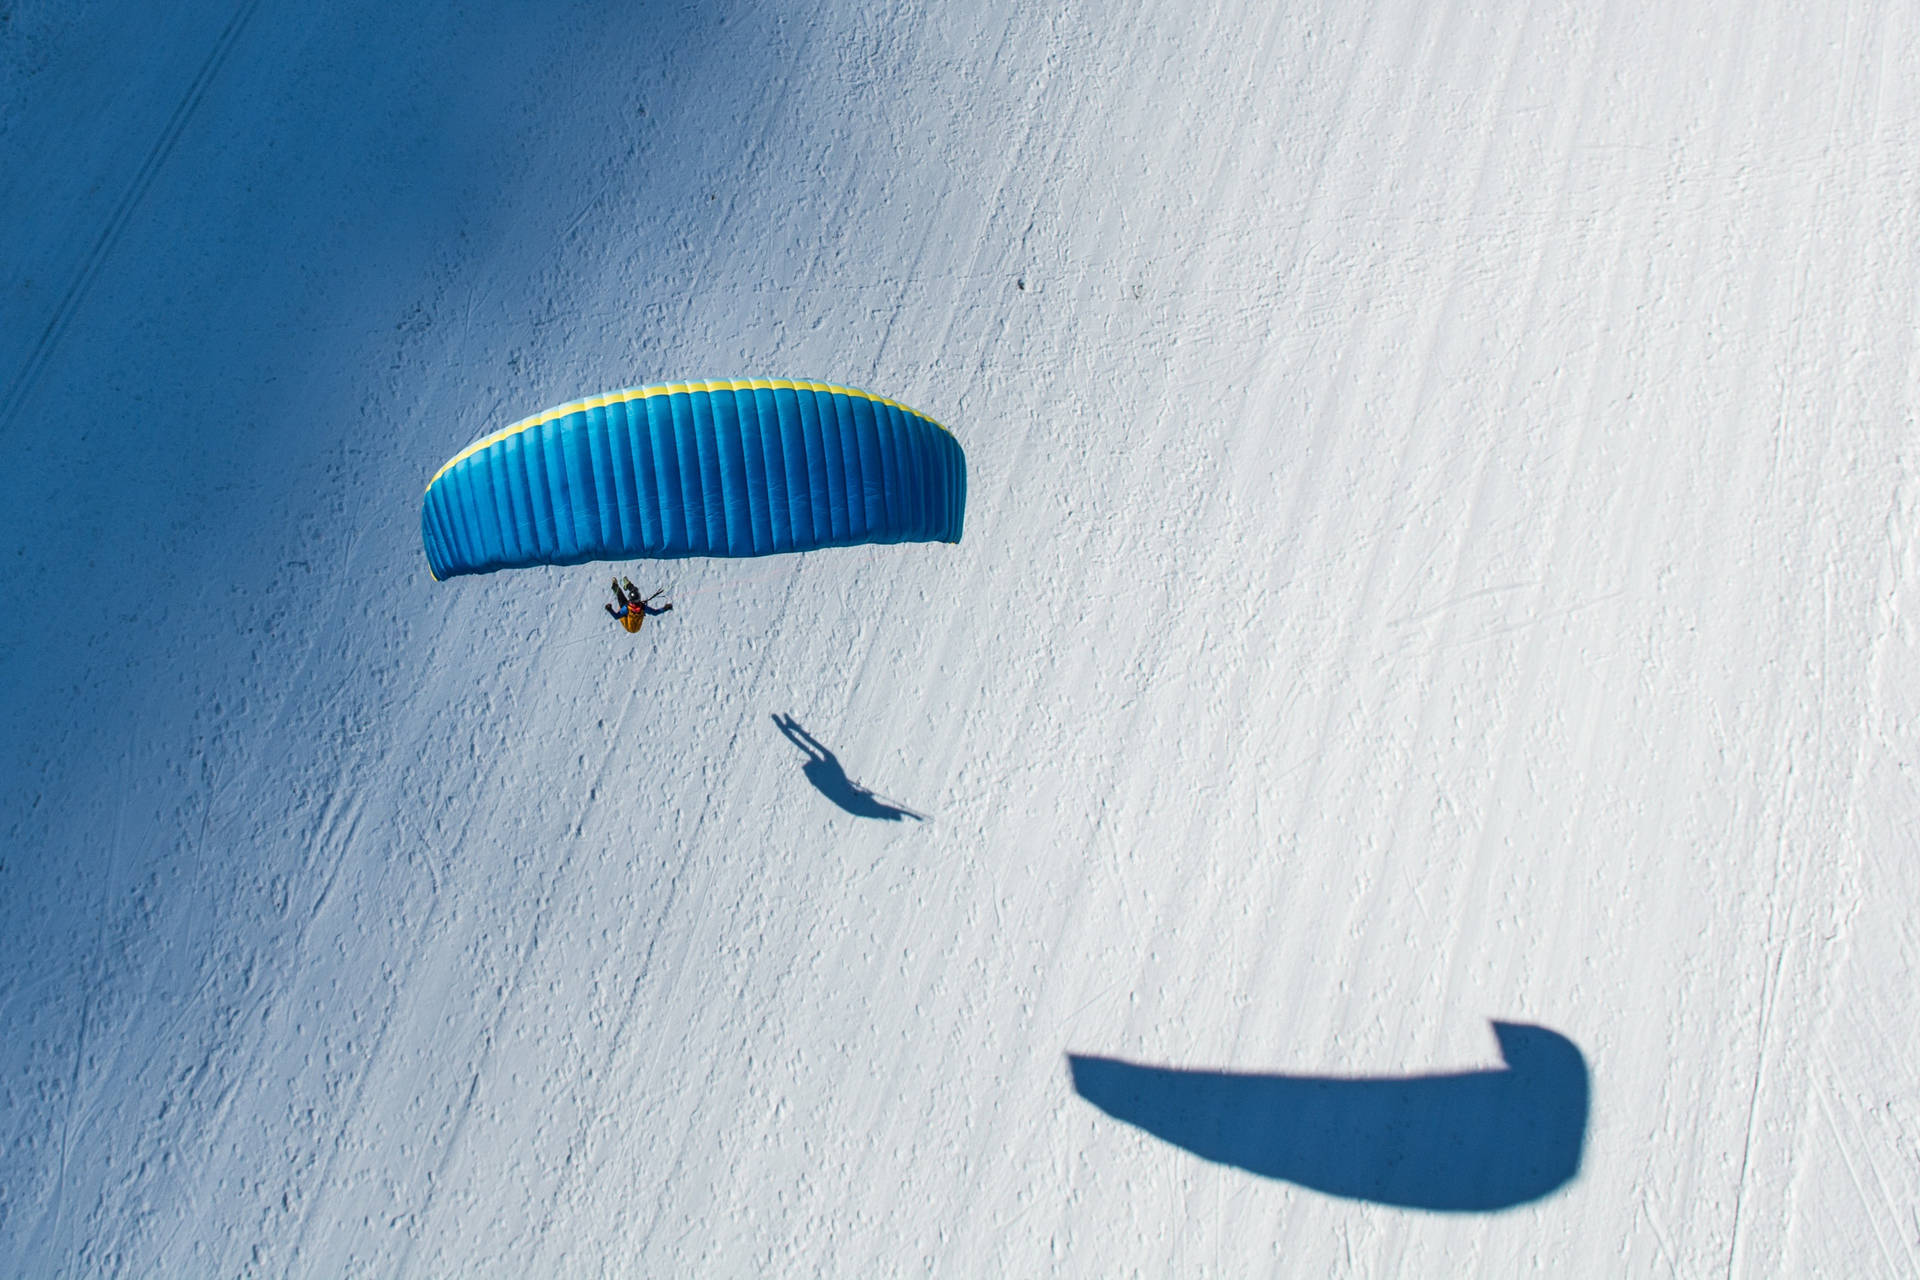 Paraglidingovanför Snö (as A Suggestion For A Computer Or Mobile Wallpaper Of A Paraglider Flying Above Snowy Mountains) Wallpaper